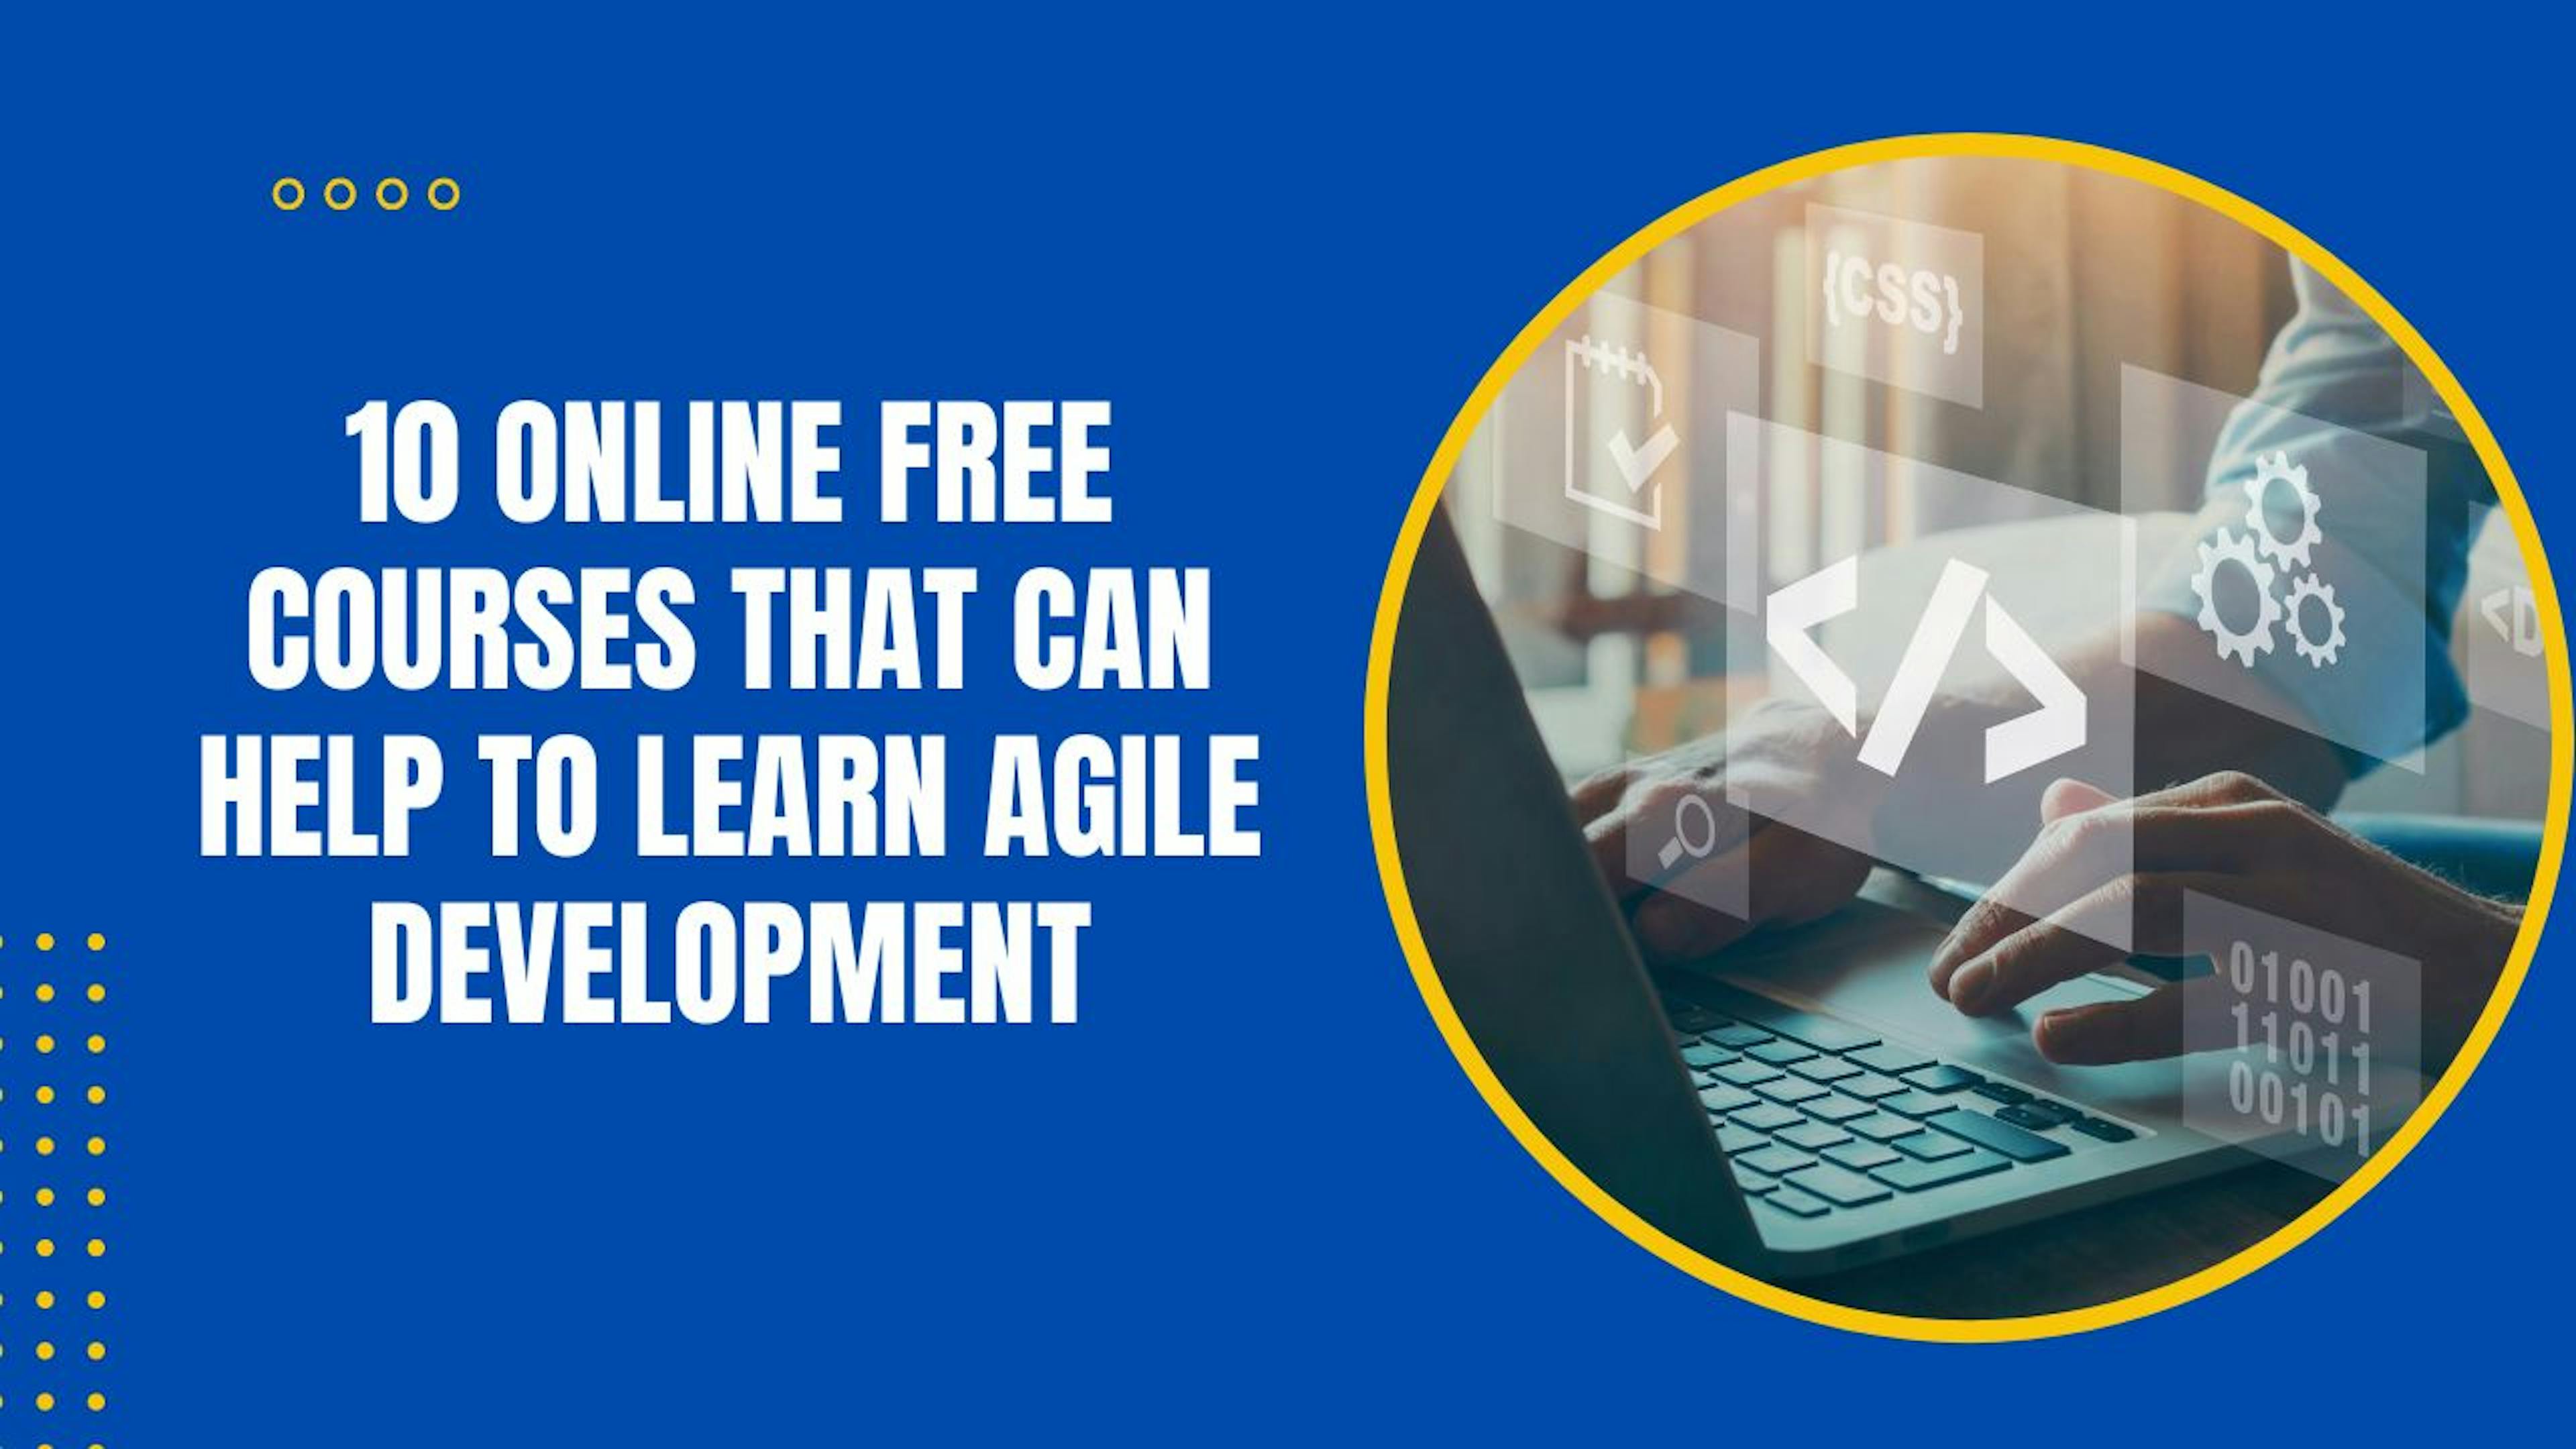 featured image - 10 Online Free Courses That Can Help to Learn Agile Development